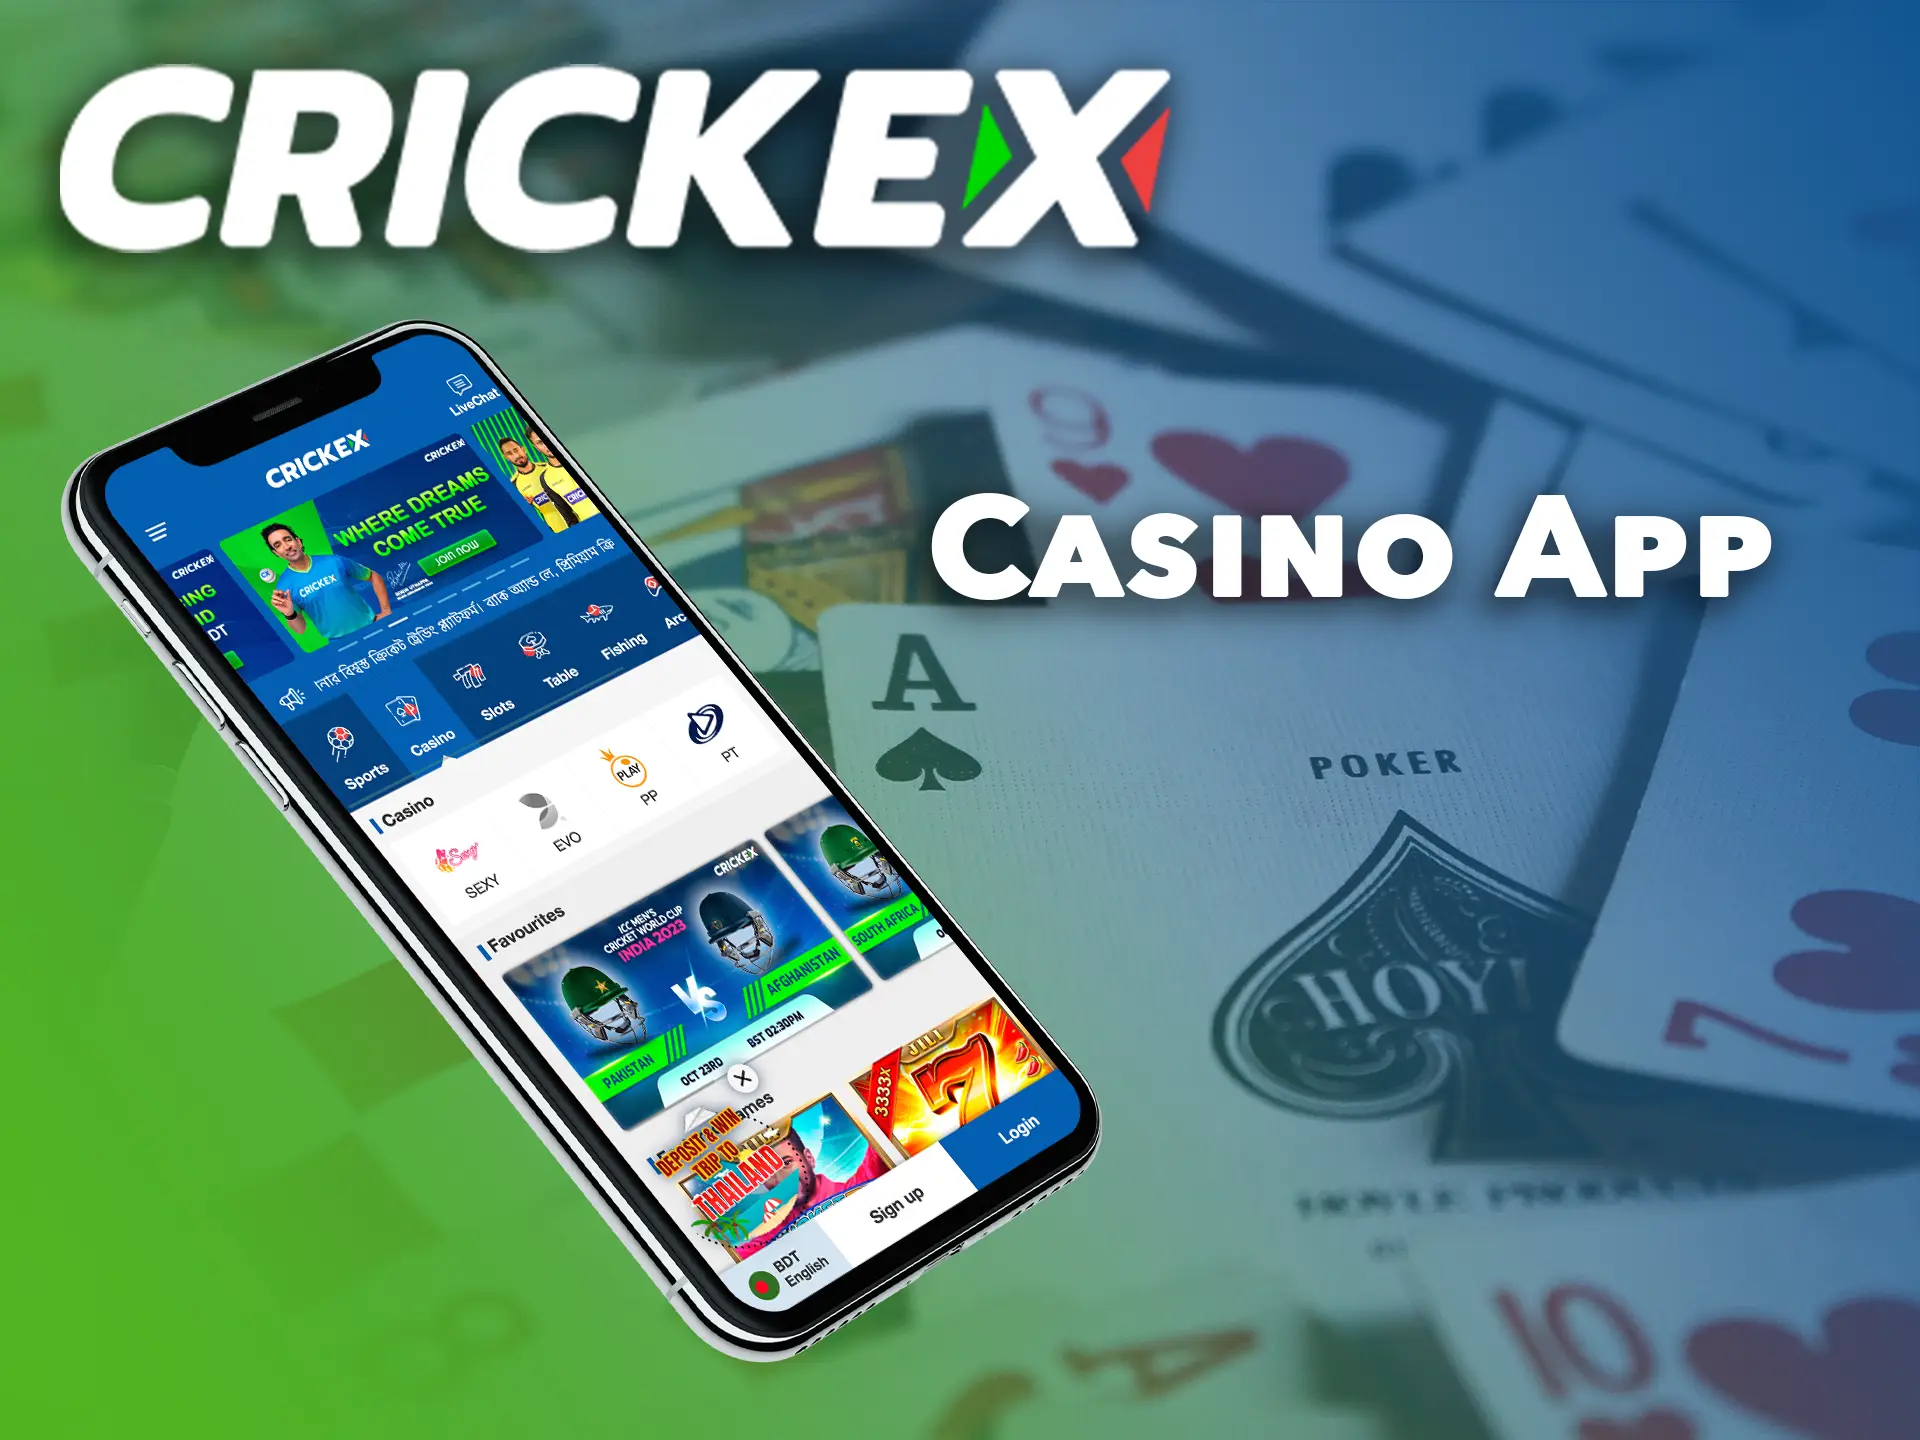 You will get an excellent combination of functionality and quality without losing important features in Crickex smartphone software.